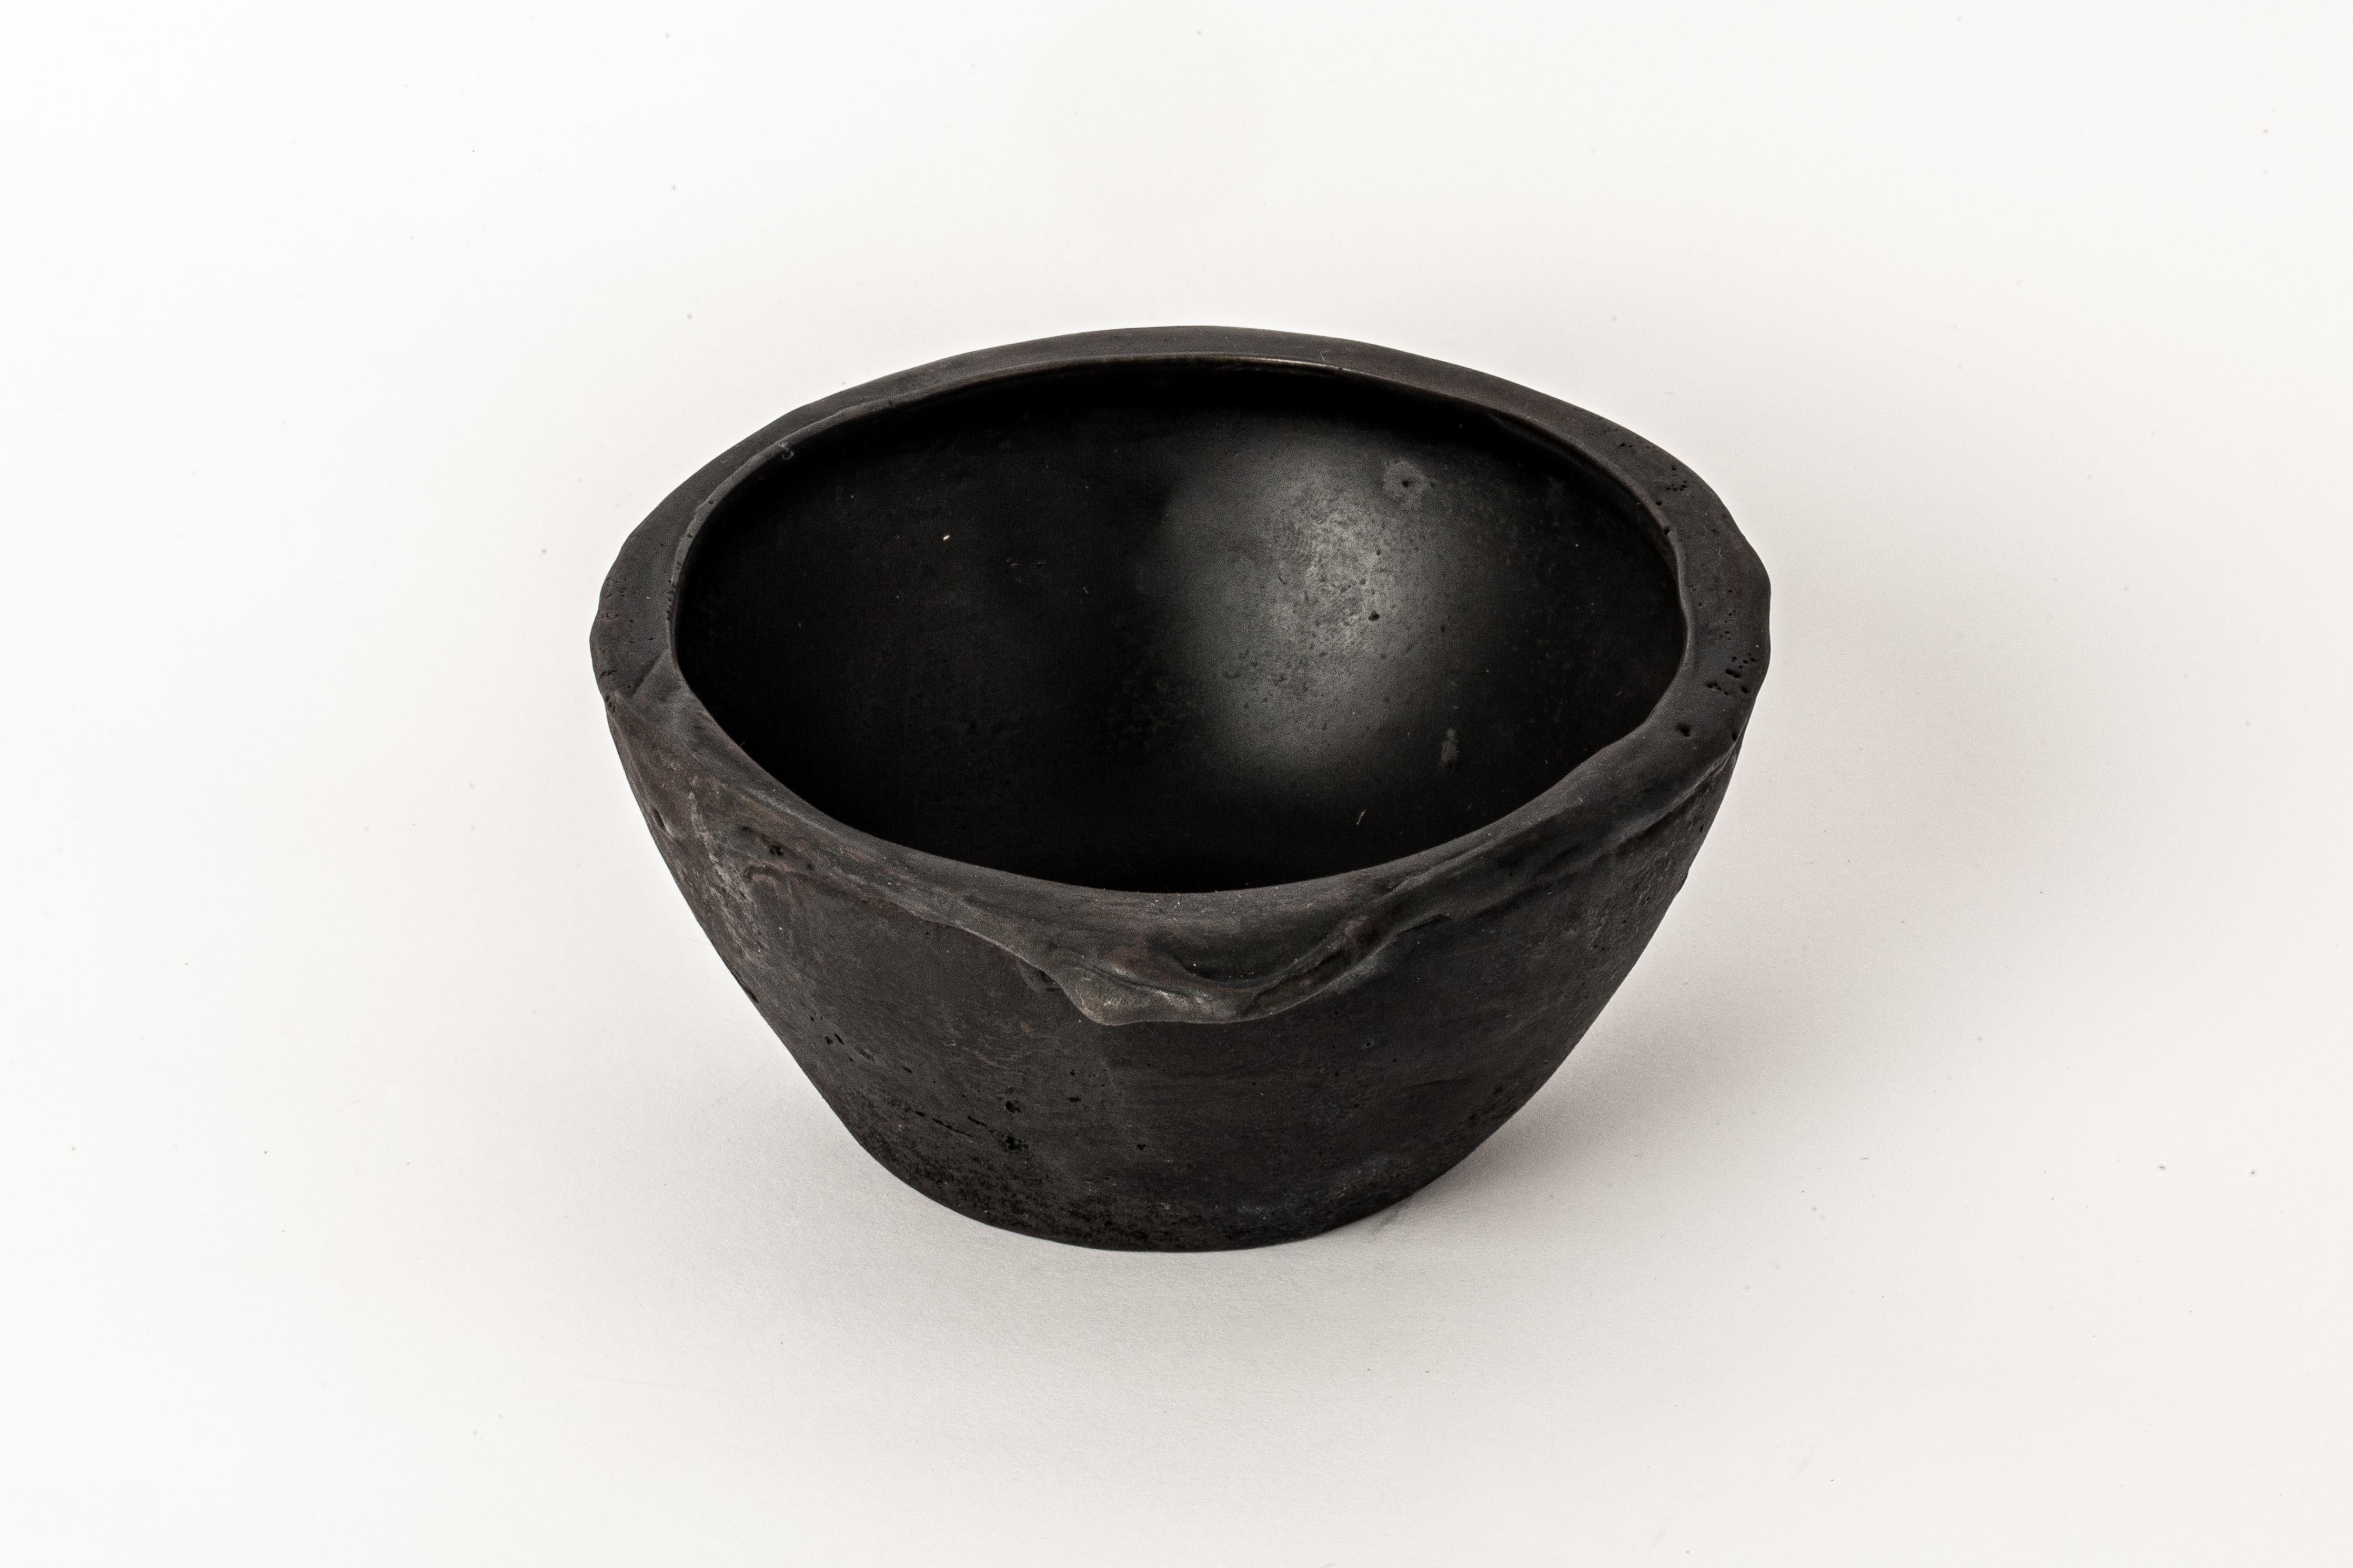 Small bowl in bronze.  It is a harmonious fusion of textures and tones that gleams with radiant elegance. Its exterior, adorned with a subtle, tactile roughness, imparts a unique character and charm to piece. Perfect for adding a touch of artistry